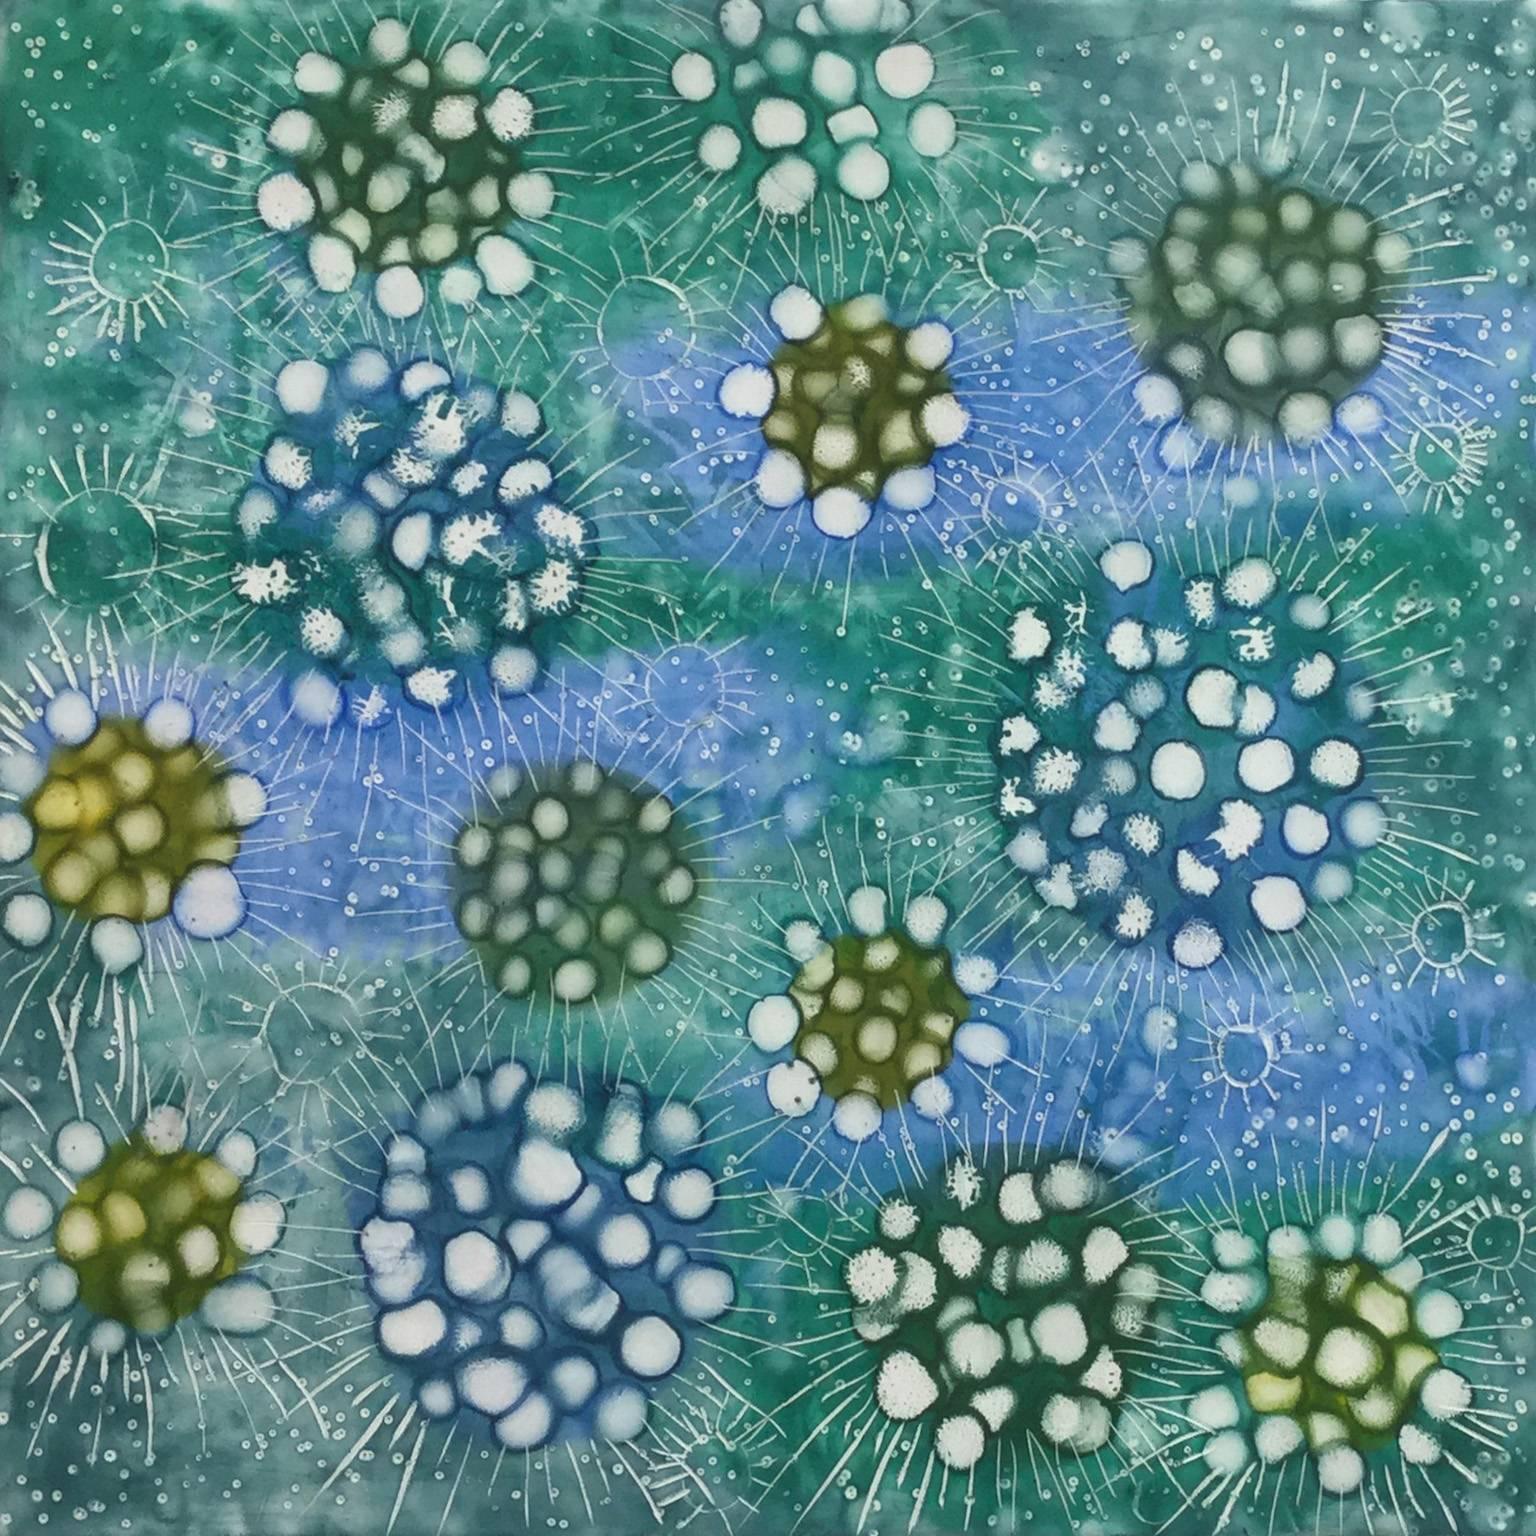 "Celestial Explosion 2", abstract, blues, greens, patterns, pastel, encaustic - Mixed Media Art by Kay Hartung